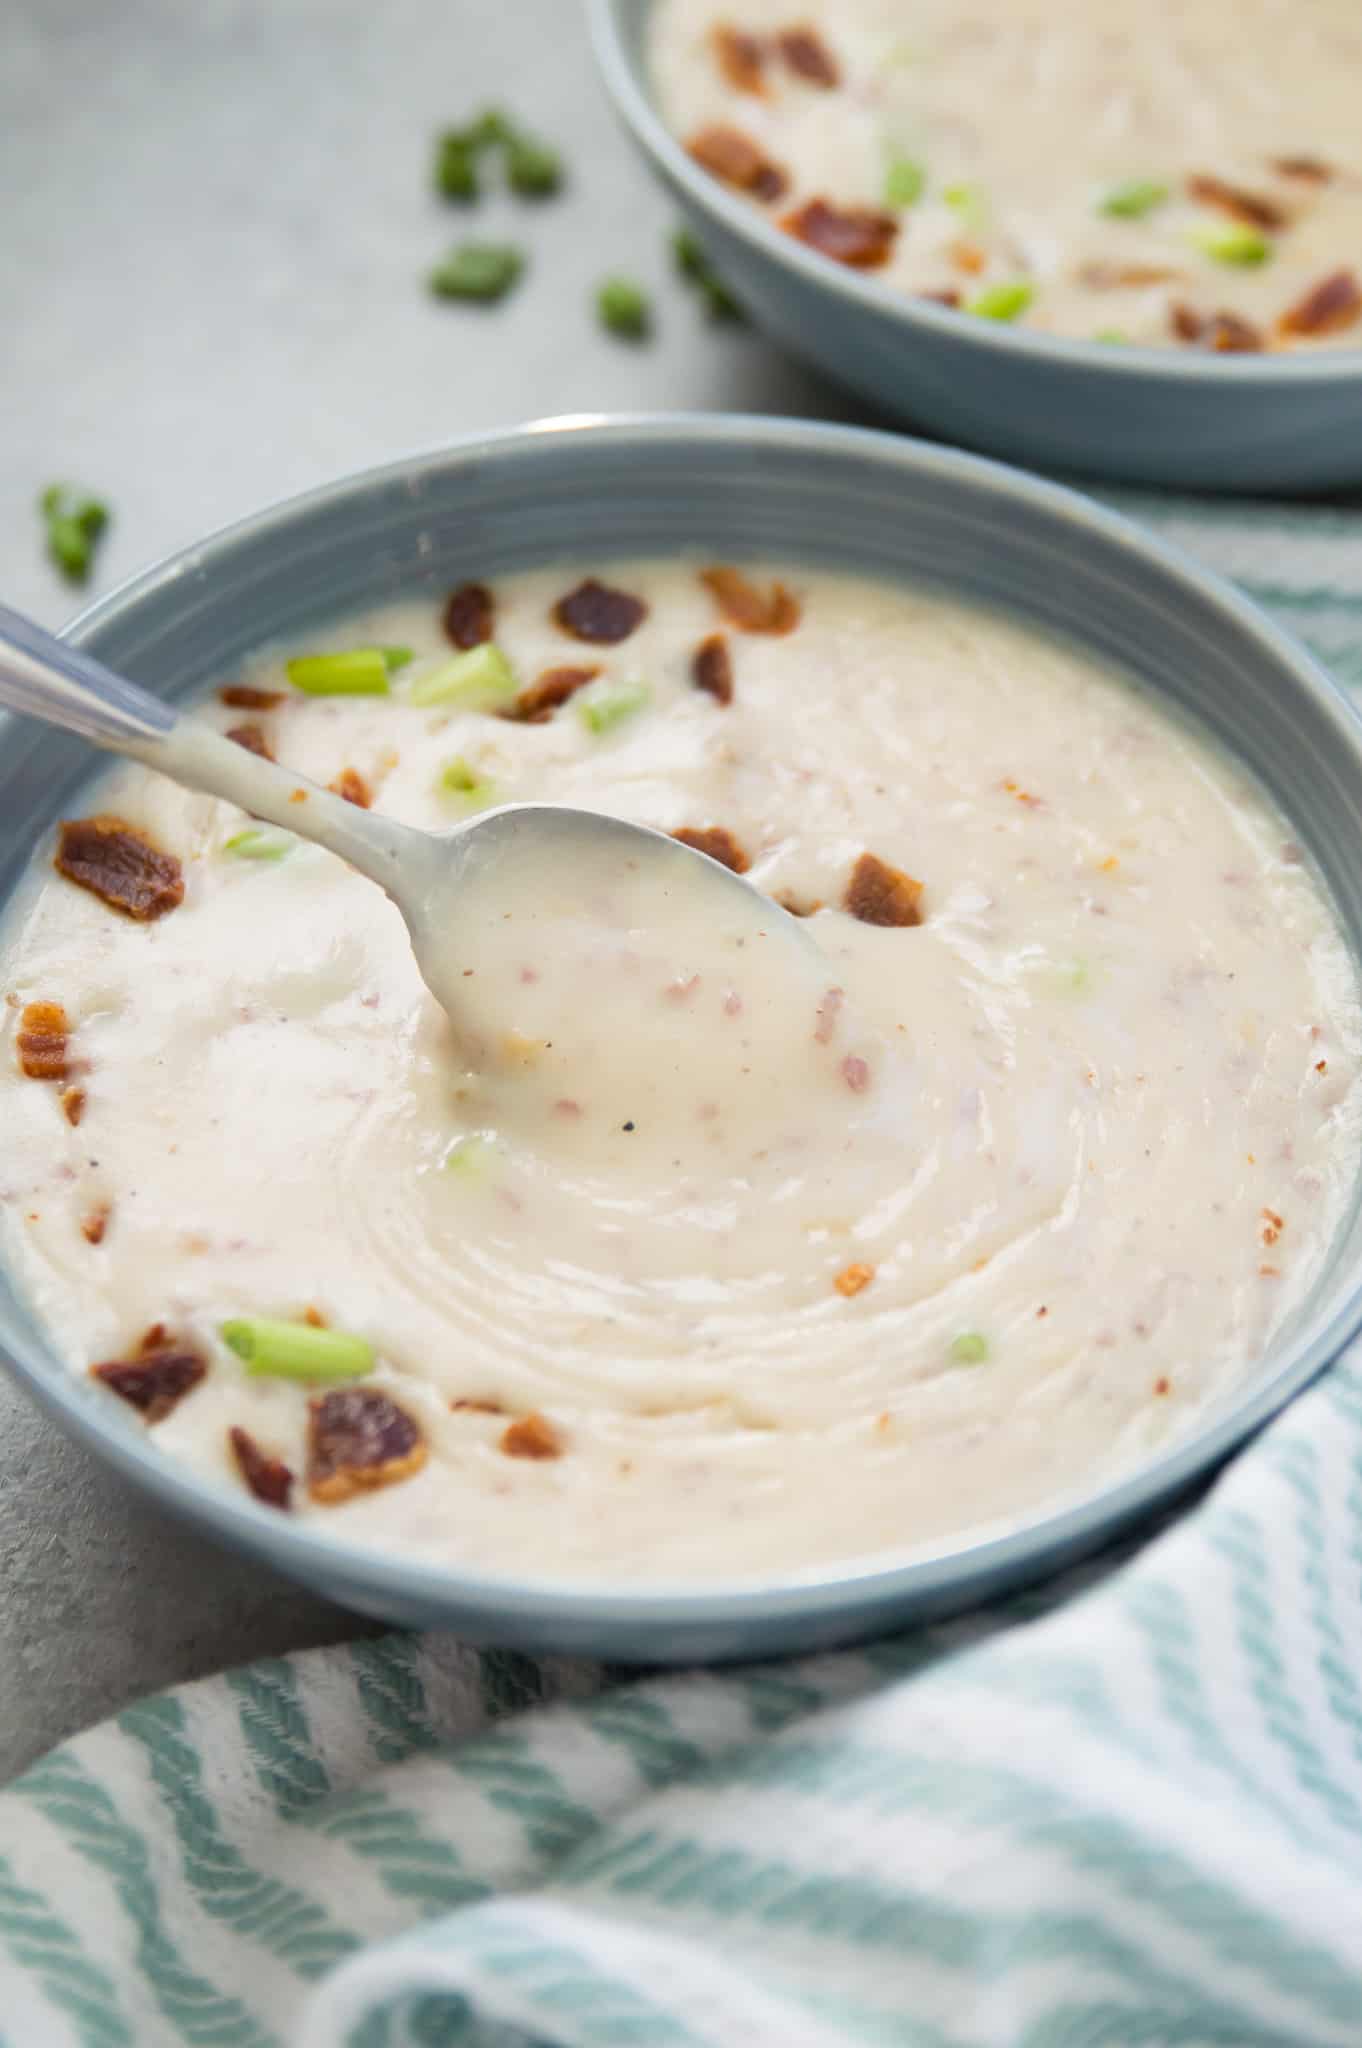 A bowl of creamy dairy free potato soup that is topped with chopped bacon, chives and has a spoon in it.